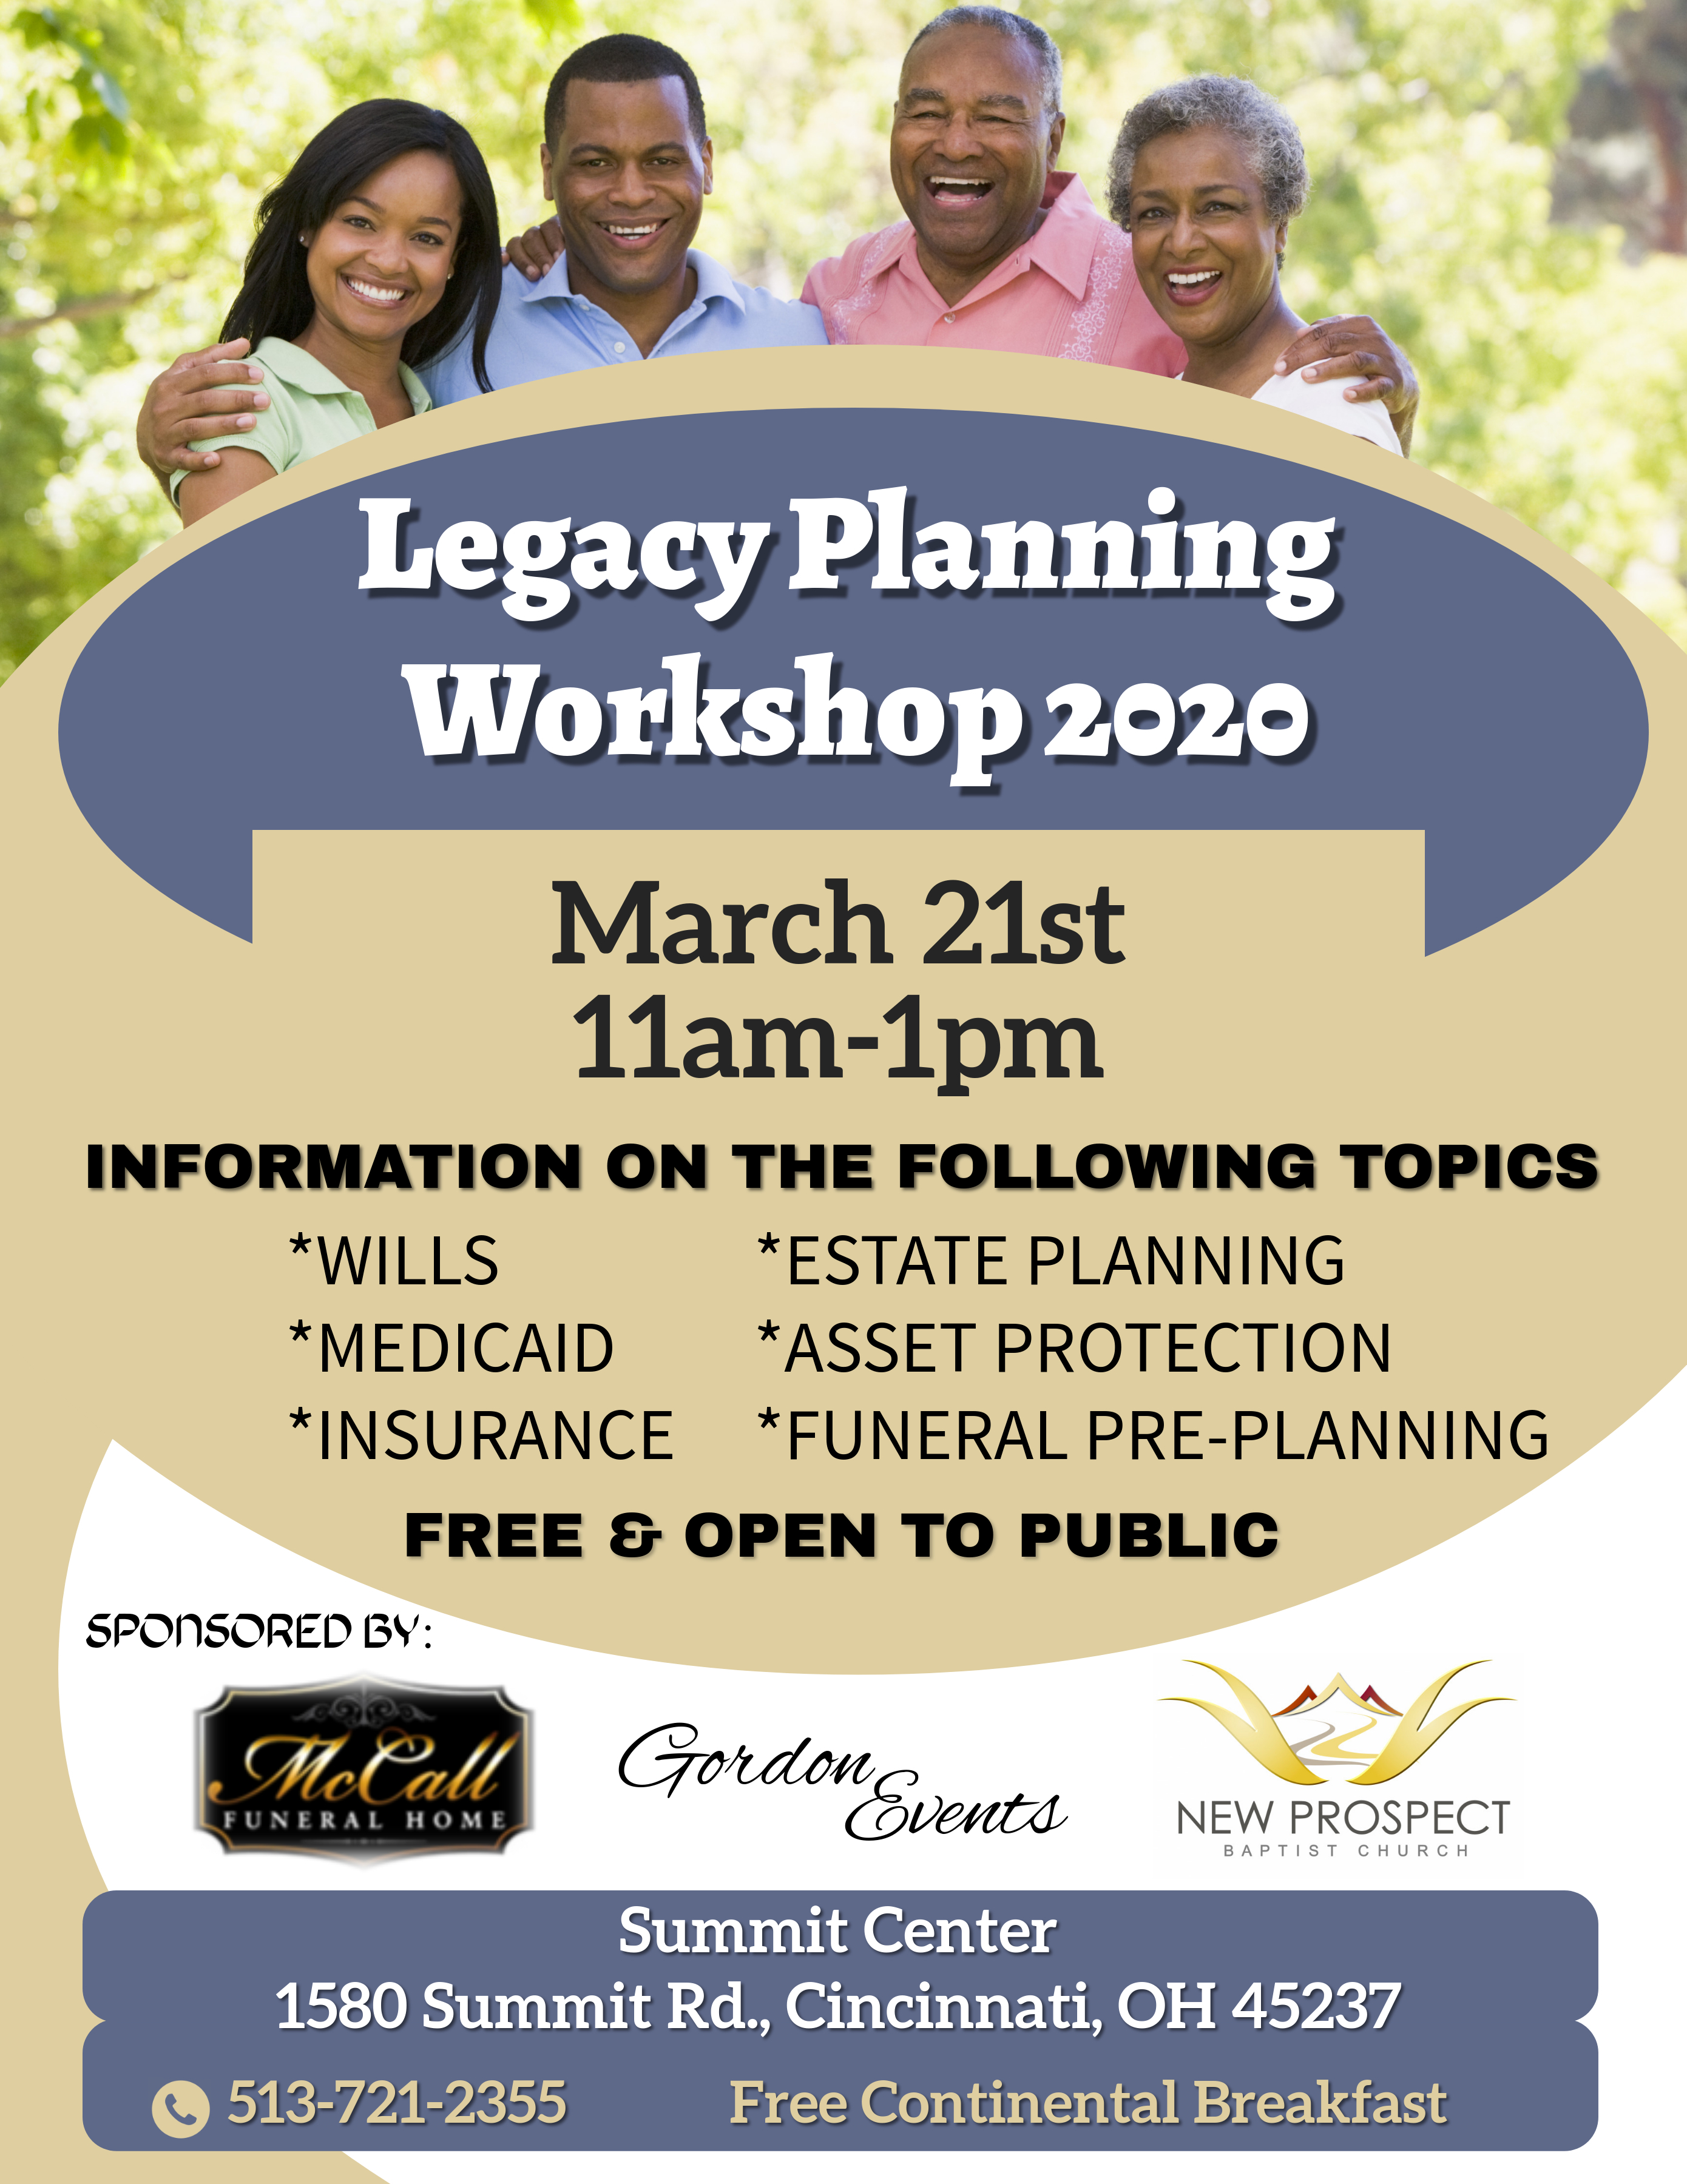 Legacy Planning Workshop 2020 at New Prospect on Saturday March 21st 11 a.m. - 1 p.m.